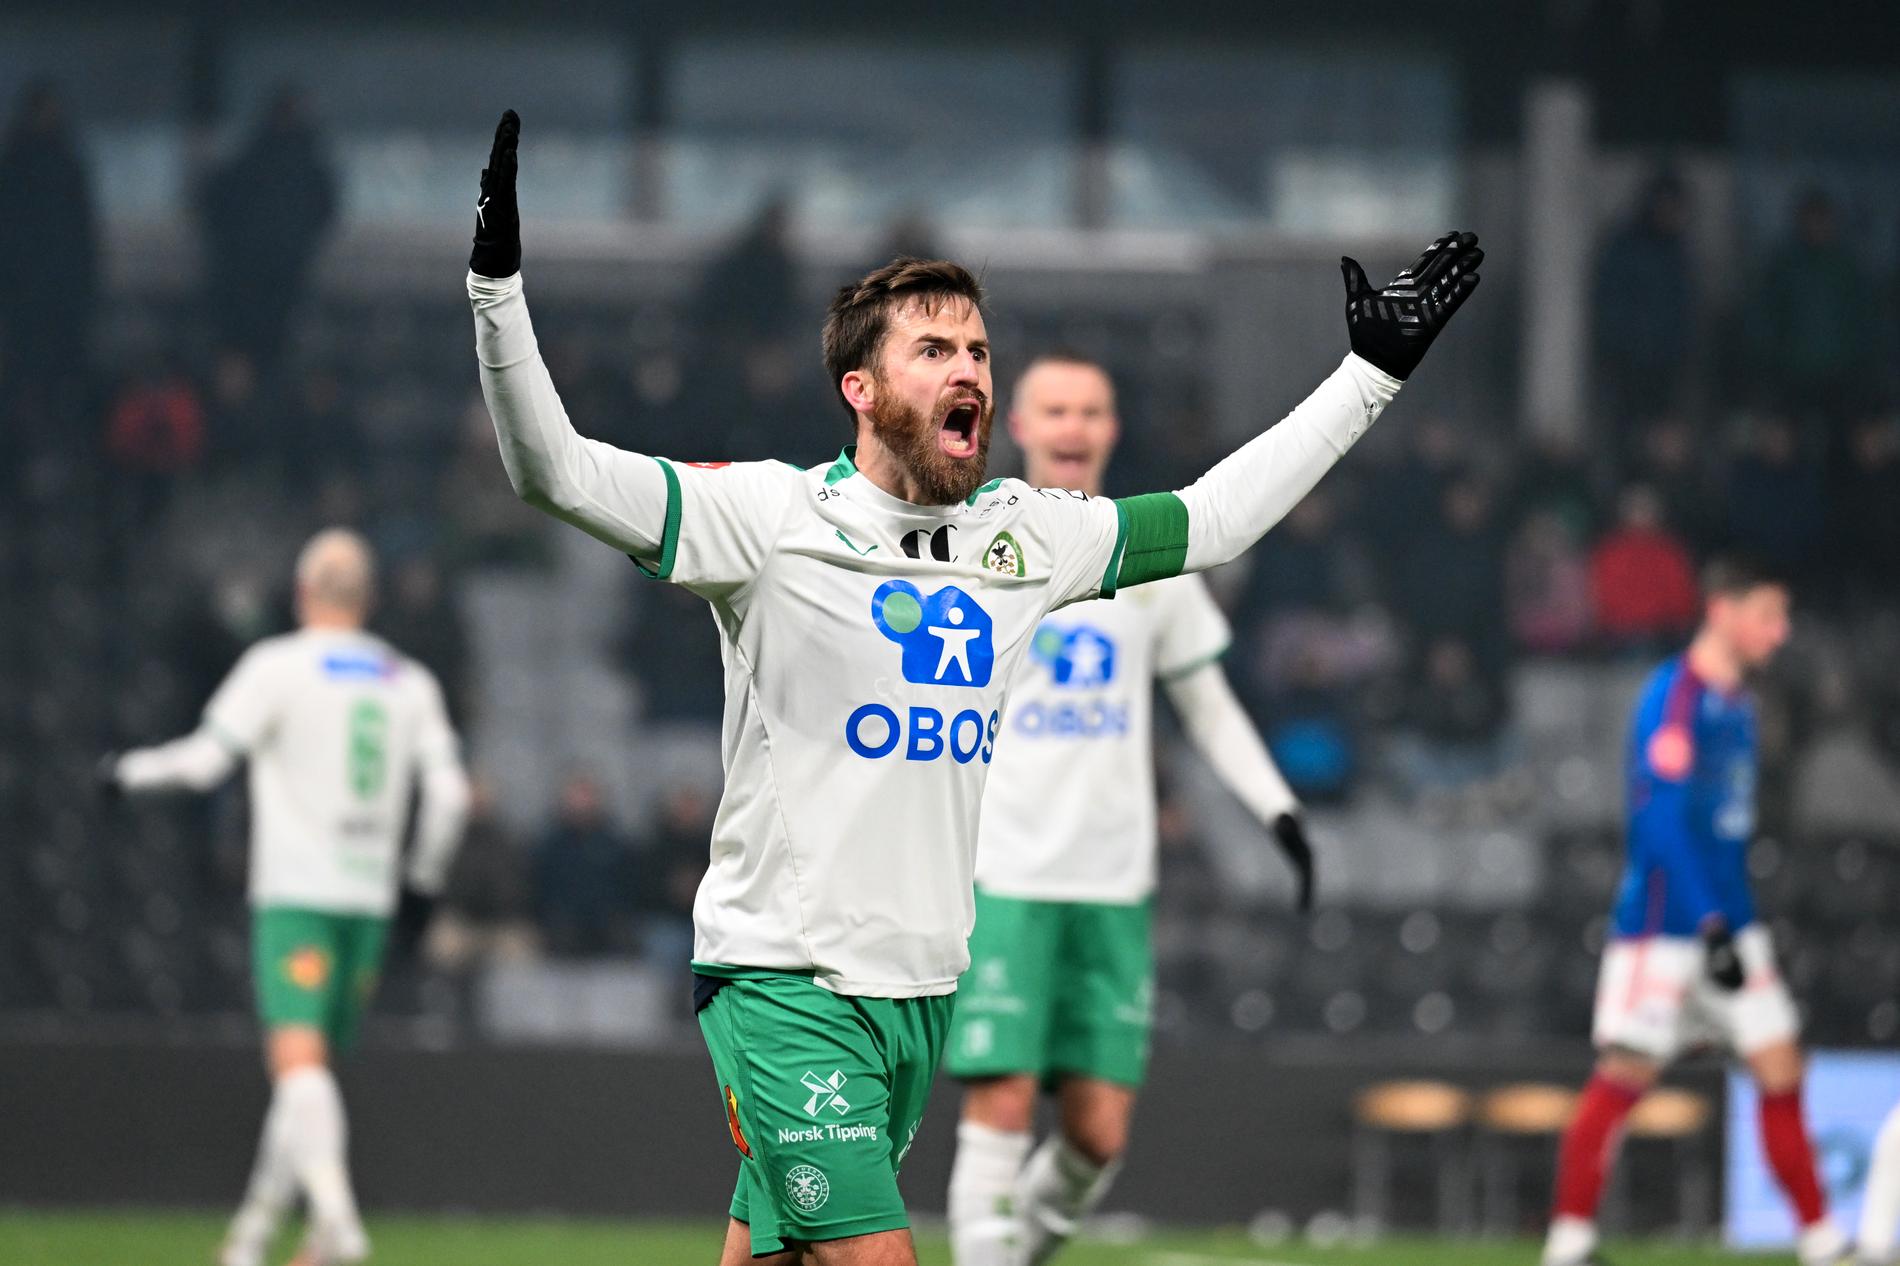 LSK-HEART: Alexandre Miljalves and Hamkam failed to face Valerenga.  Now it is believed that the old club will lose to Sandefjord in the final round. 